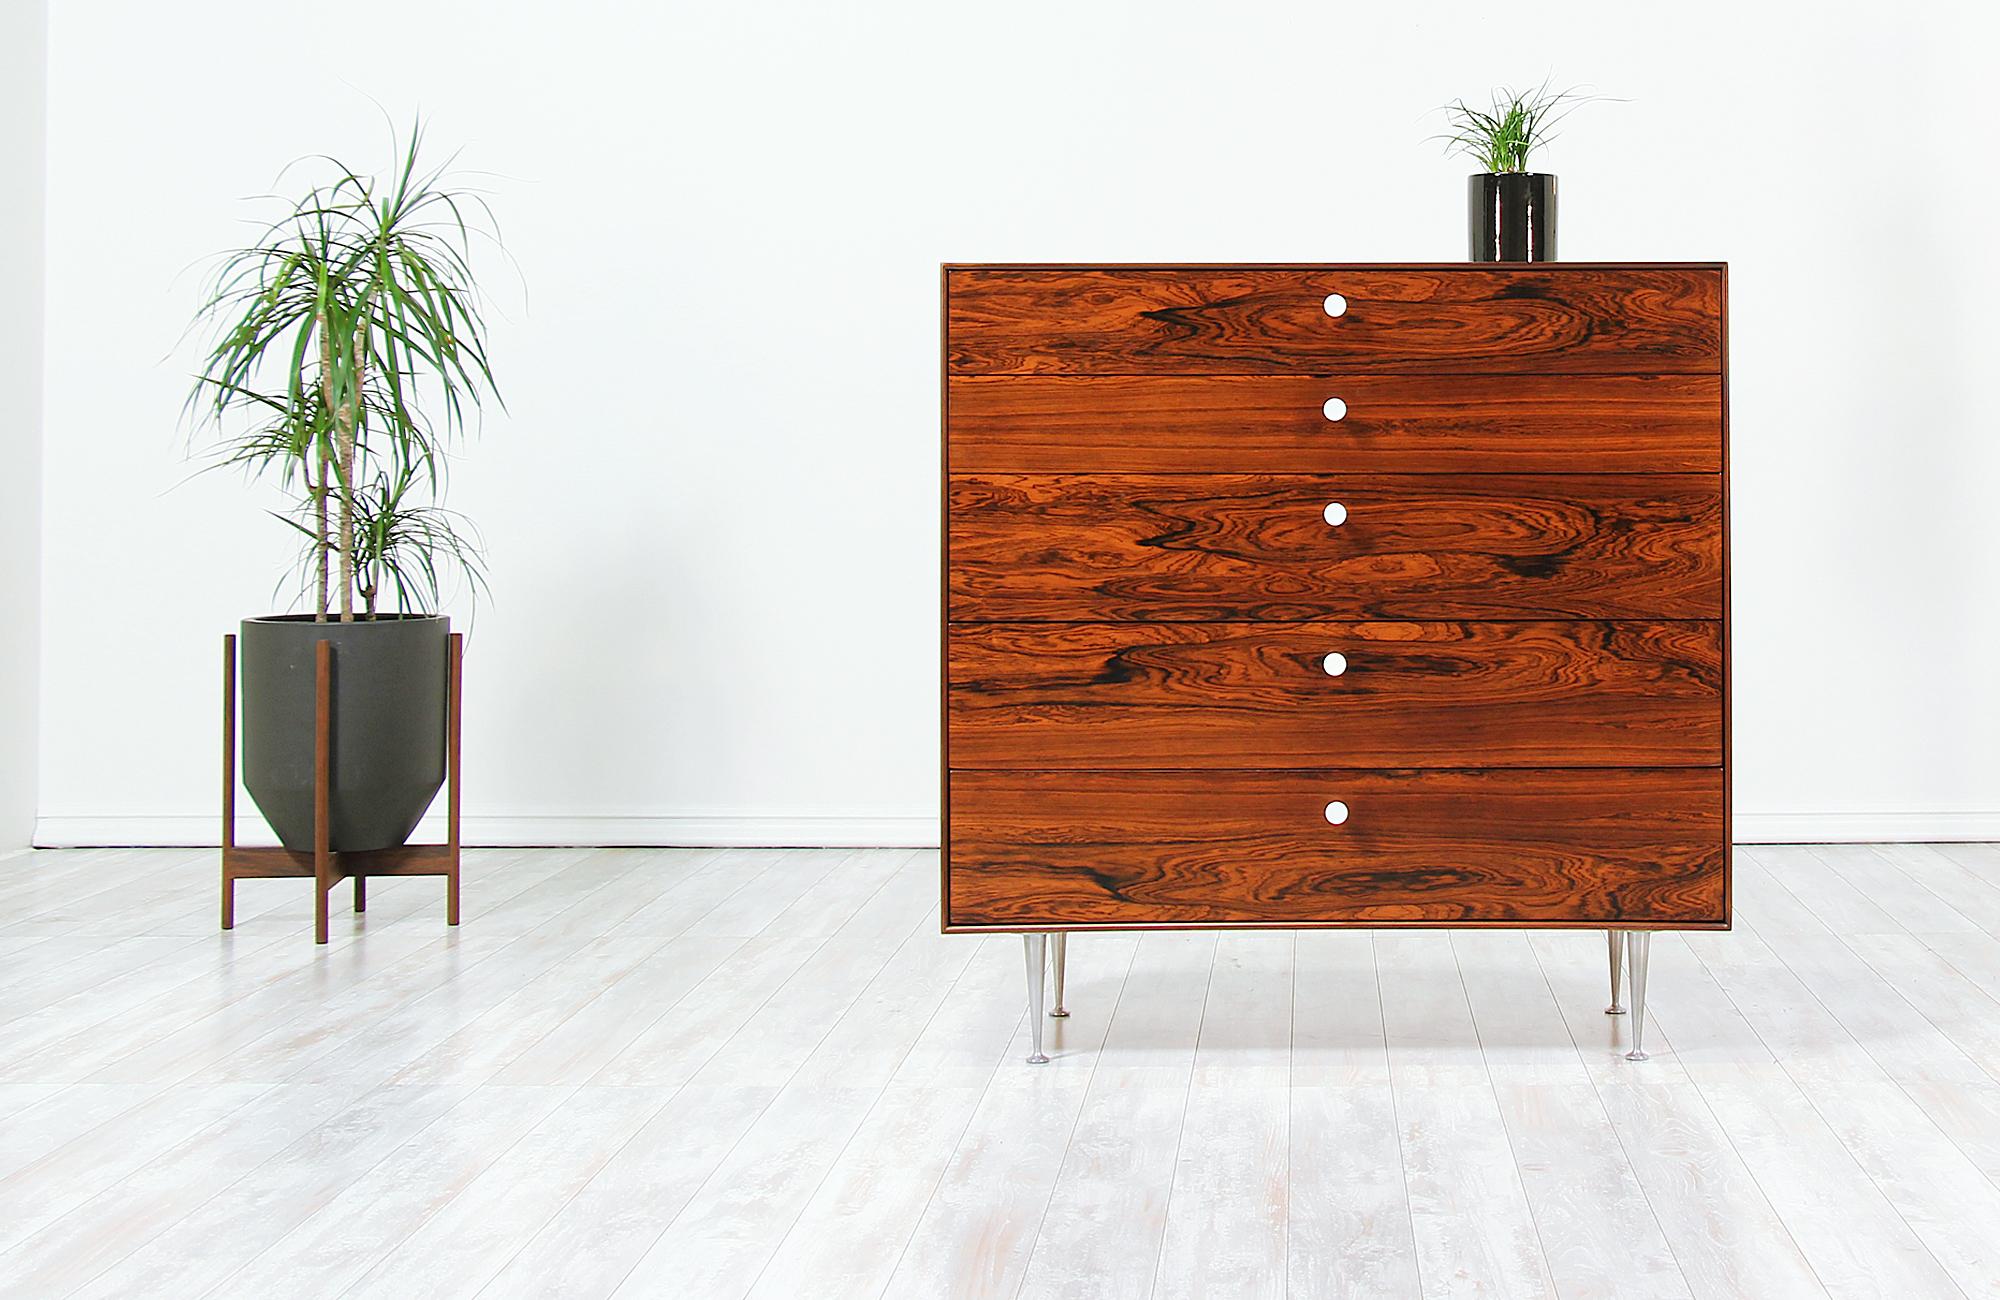 Stunning chest of drawers designed by George Nelson for Herman Miller in the United States, circa 1950s. Just like the rest of his 'Thin Edge' collection for Herman Miller, this beautiful rosewood chest features a solid frame with five drawers and